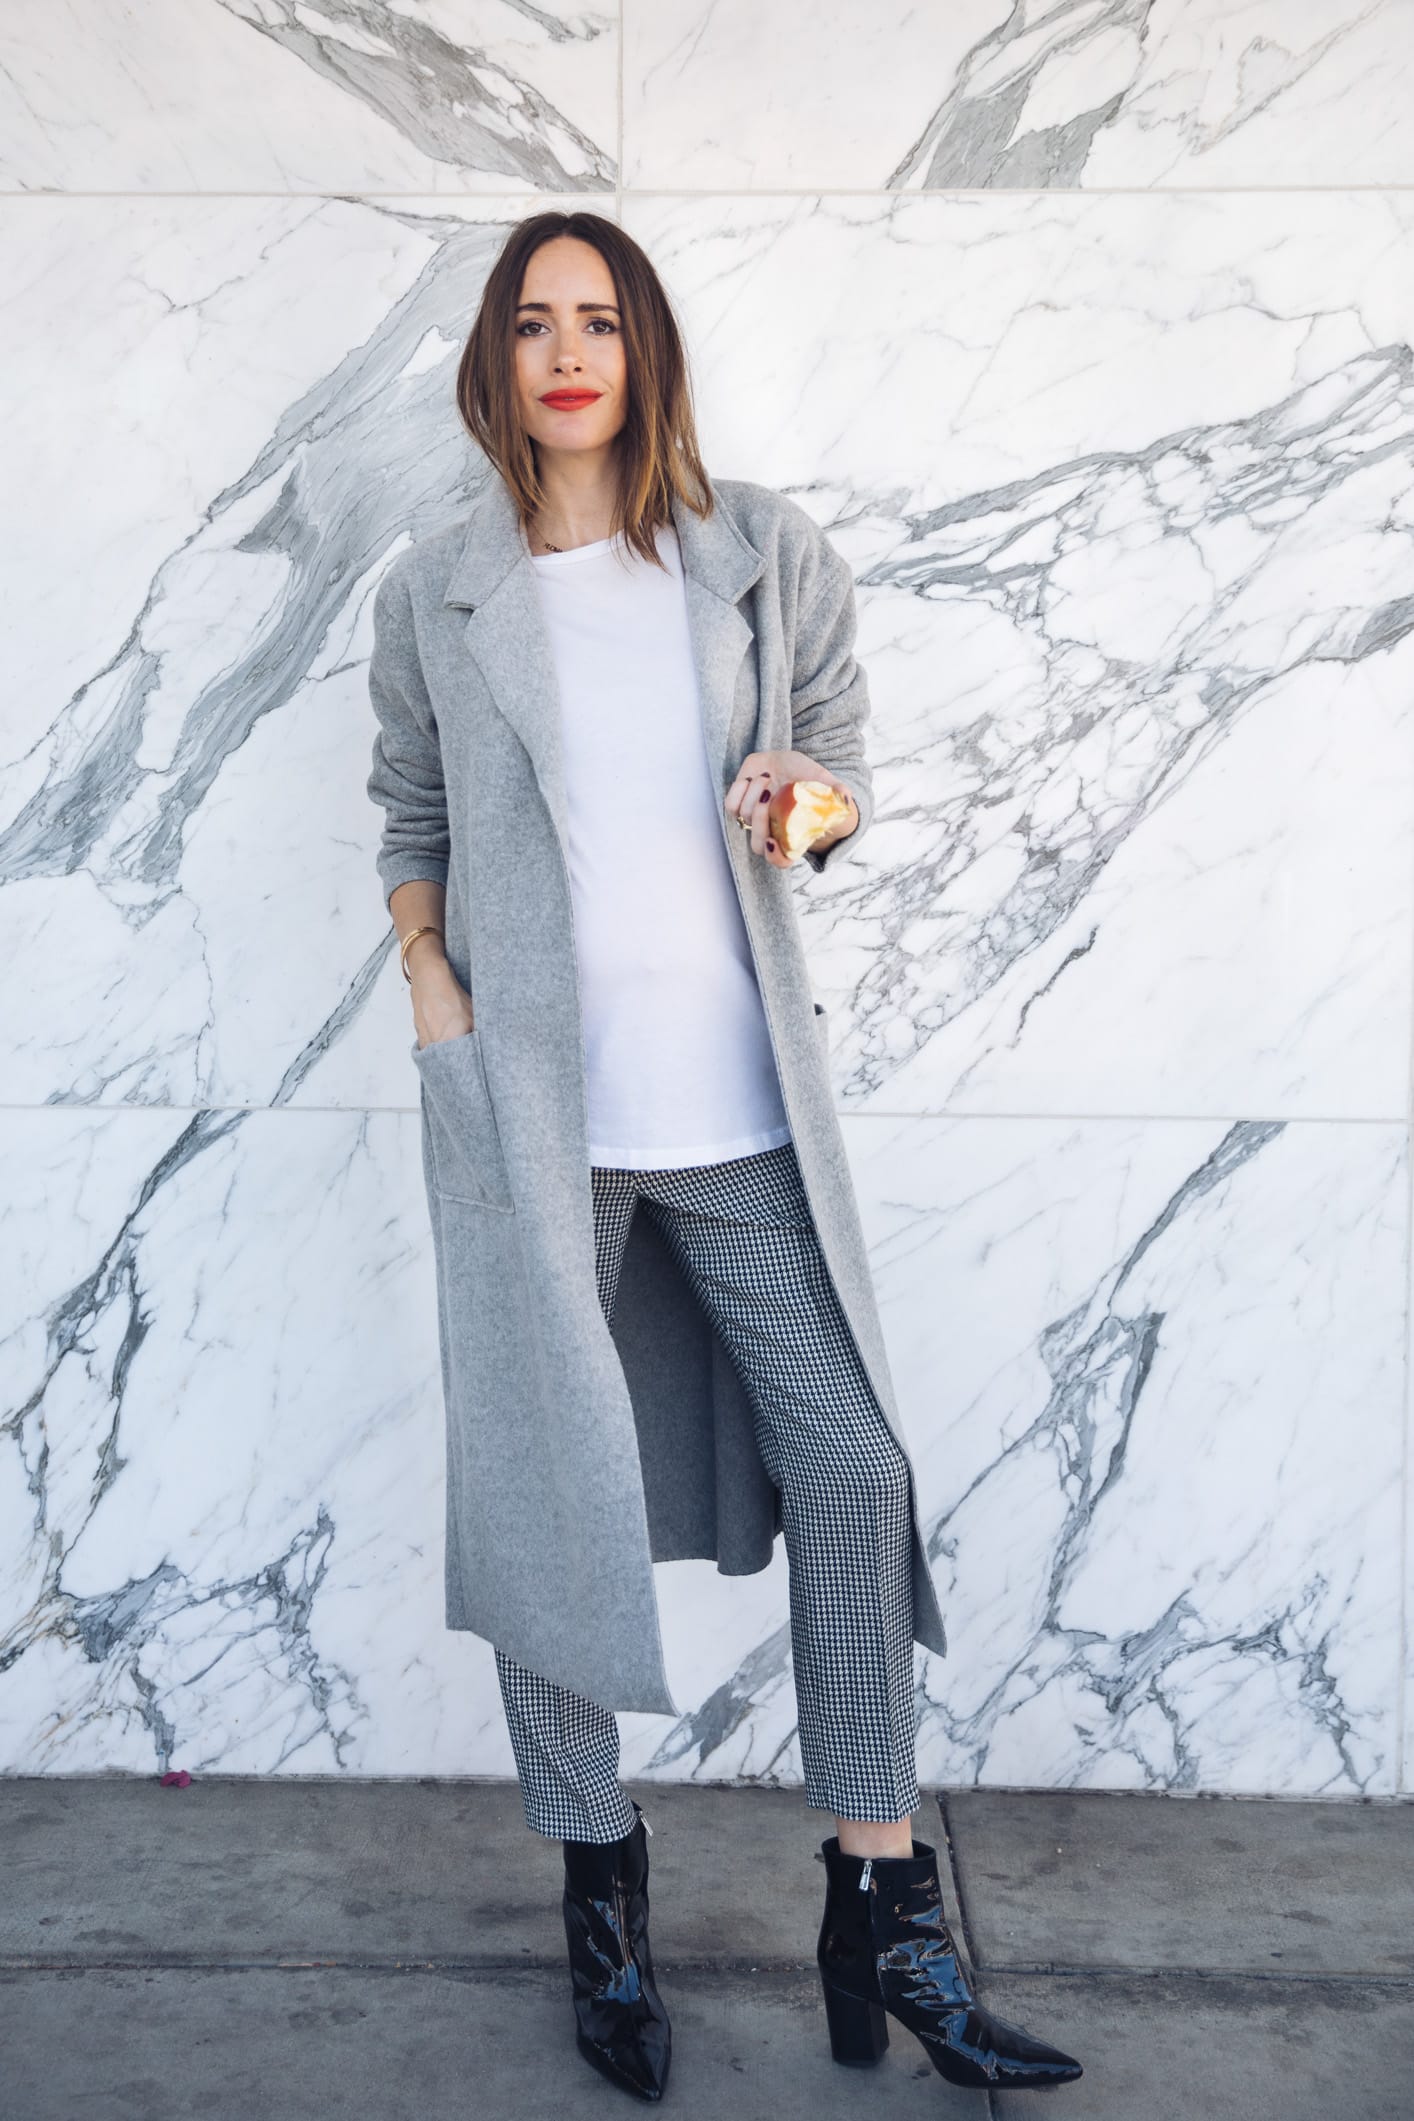 Louise Roe wearing cozy Fall coat in grey and gingham trousers